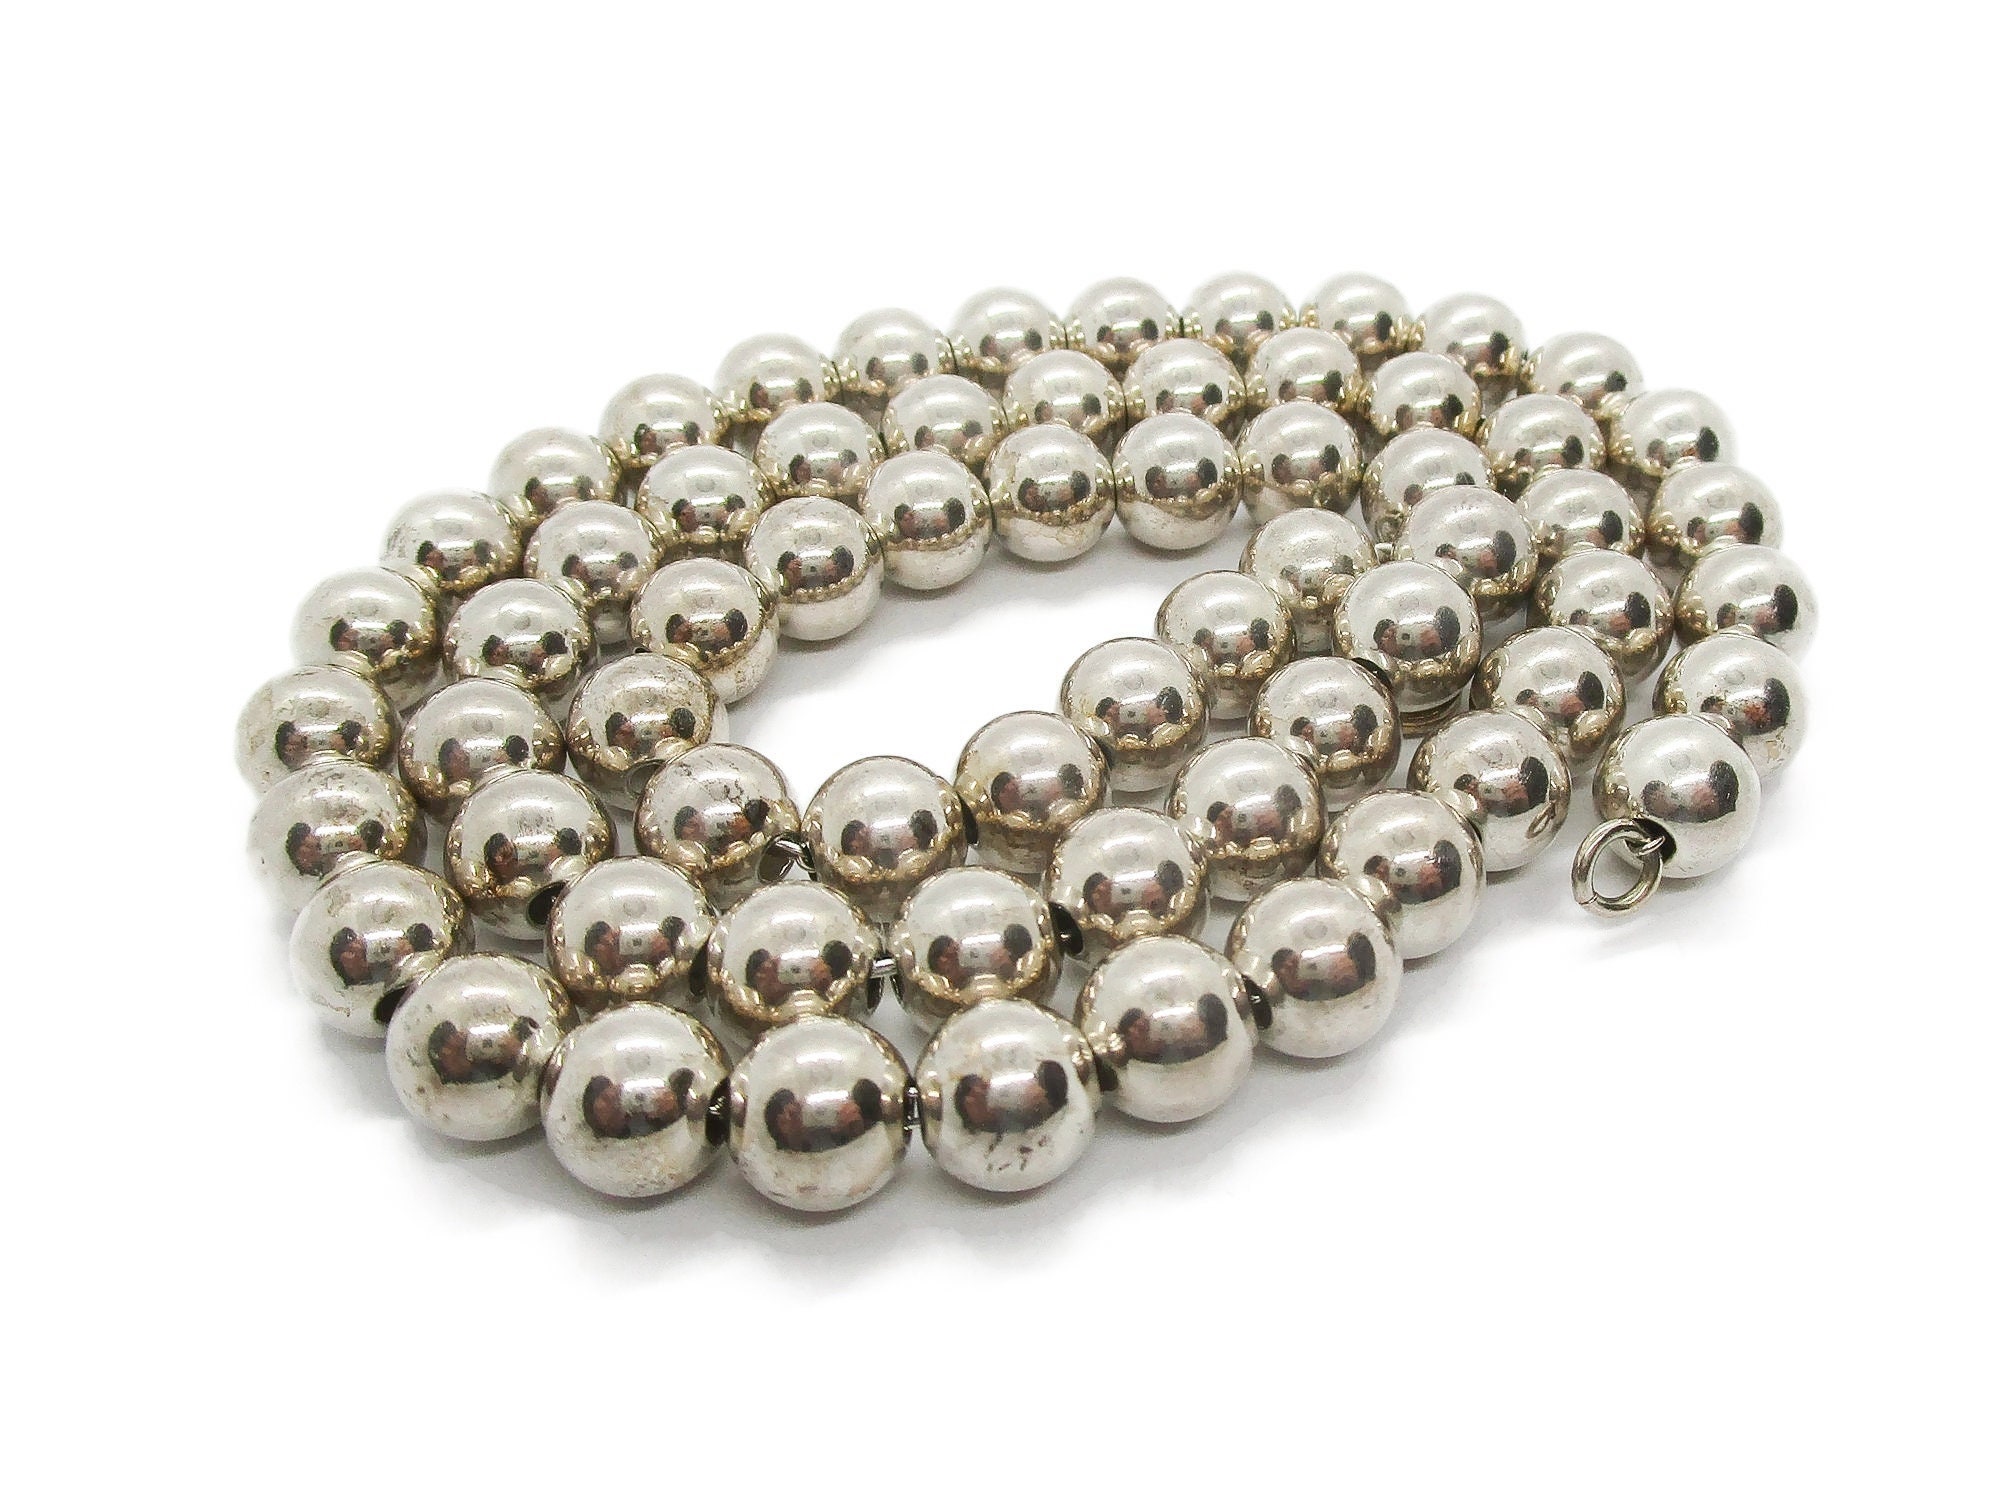 Large Silver Beads in Round and Oval Shape| GemsRainbowCo